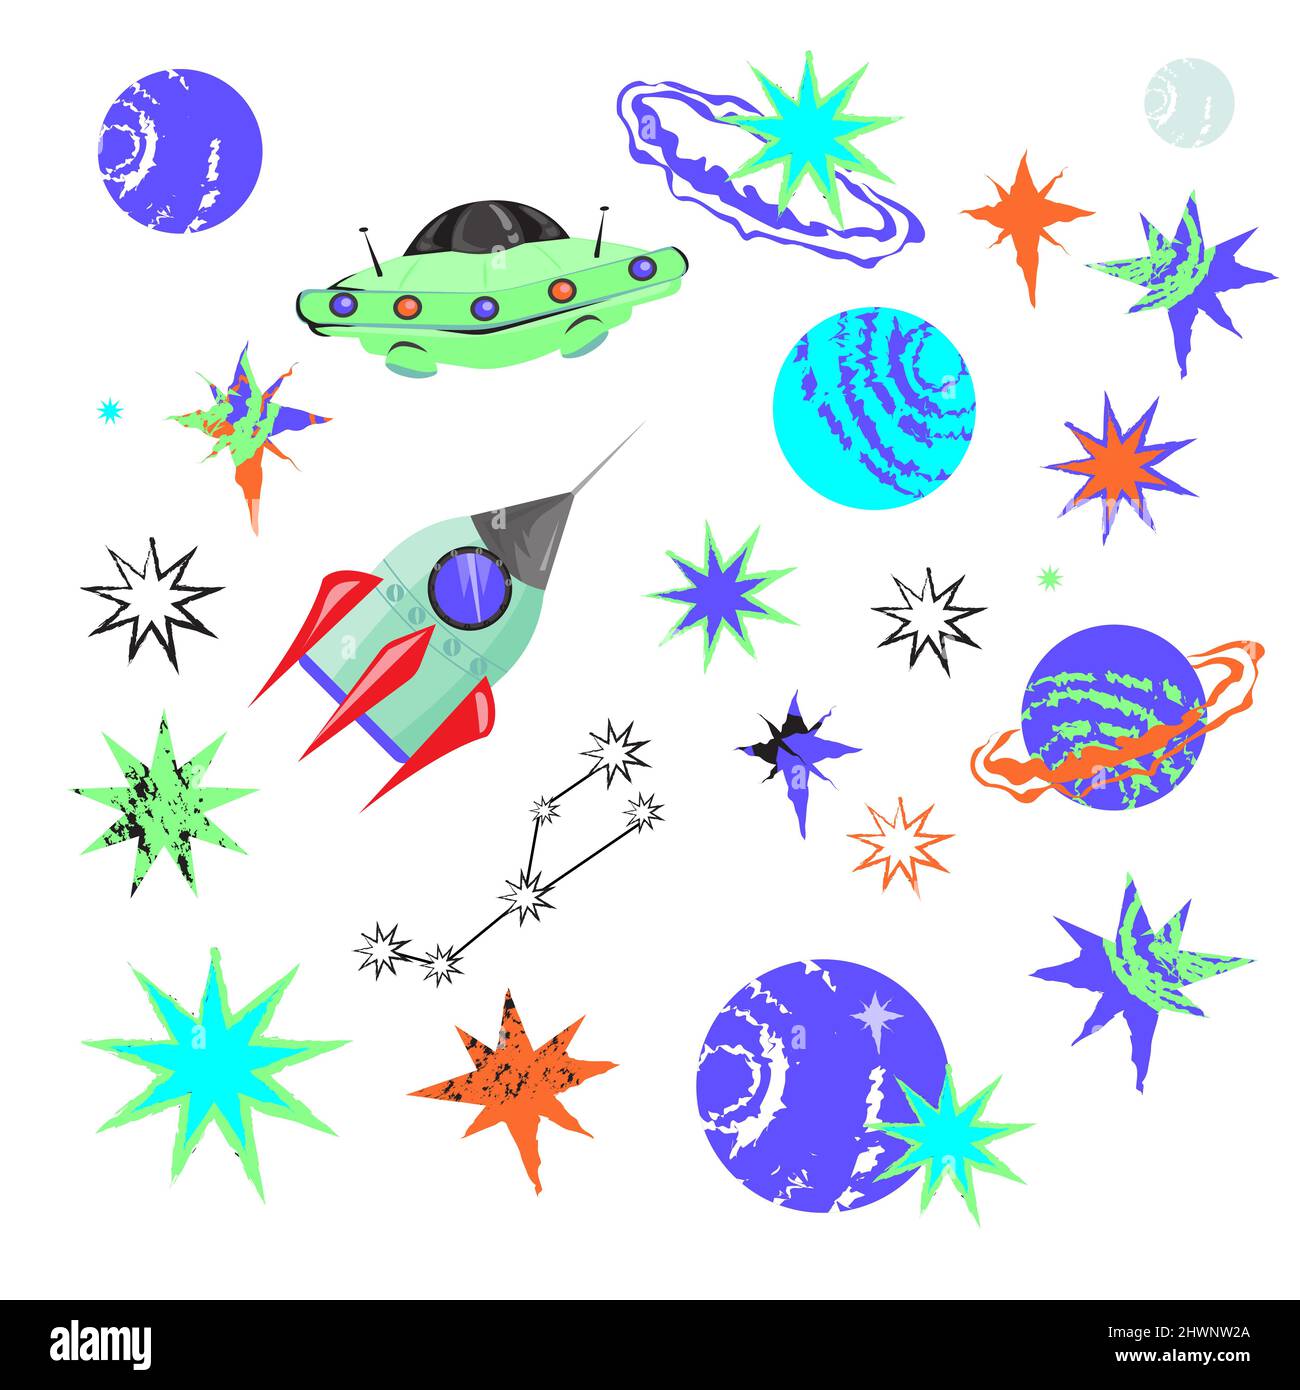 Set of space objects. Spaceship, rockets, planets, astronaut, alien, UFO  etc Stock Vector